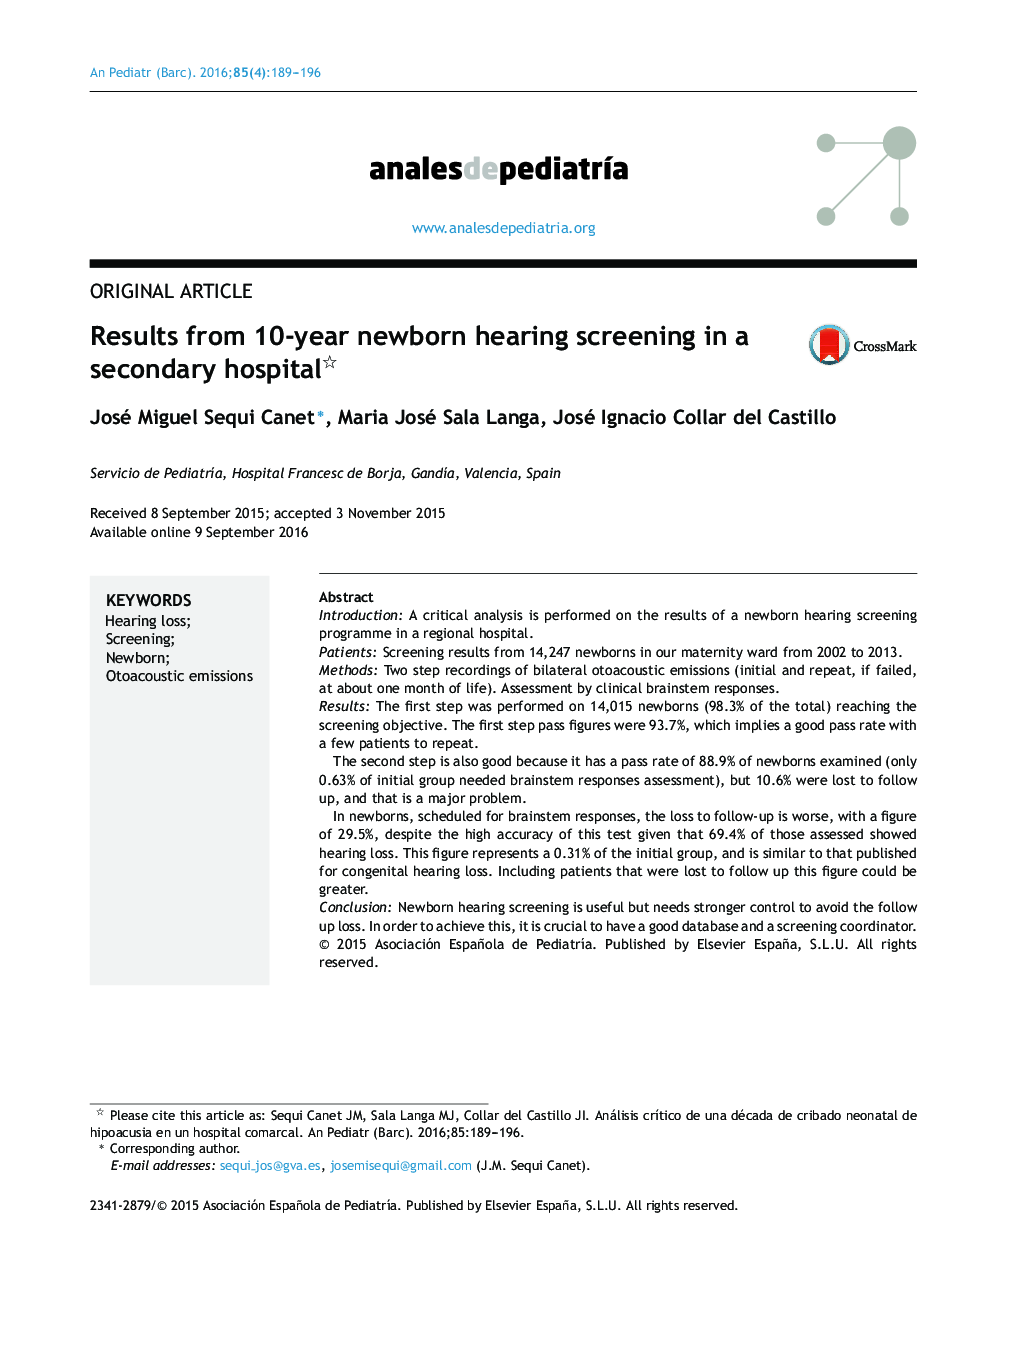 Results from 10-year newborn hearing screening in a secondary hospital 